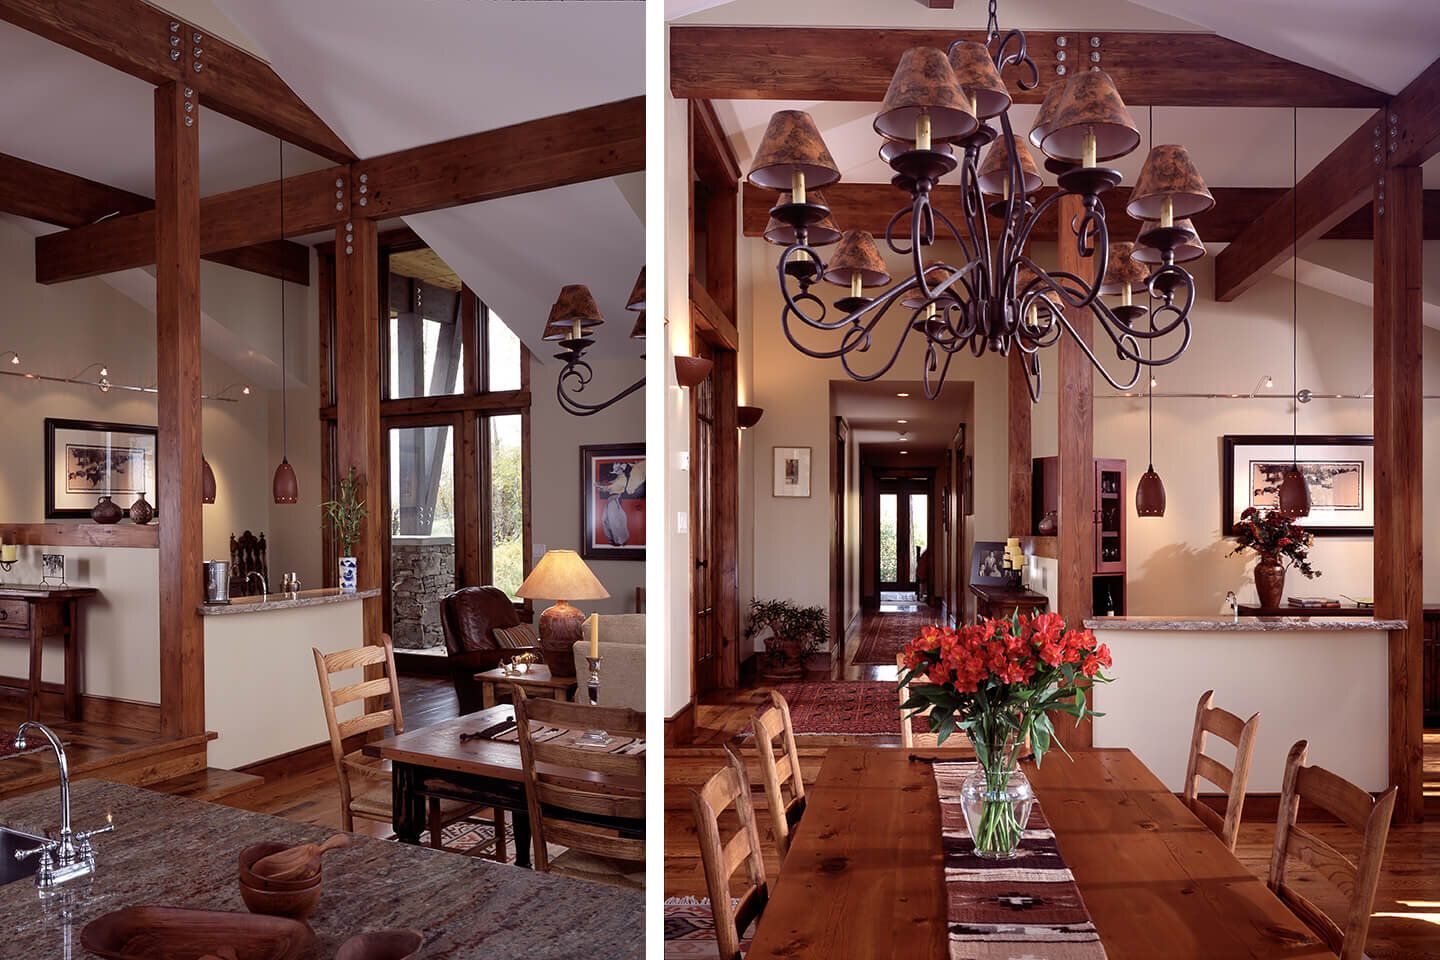 Interior view and wrought iron rustic chandelier